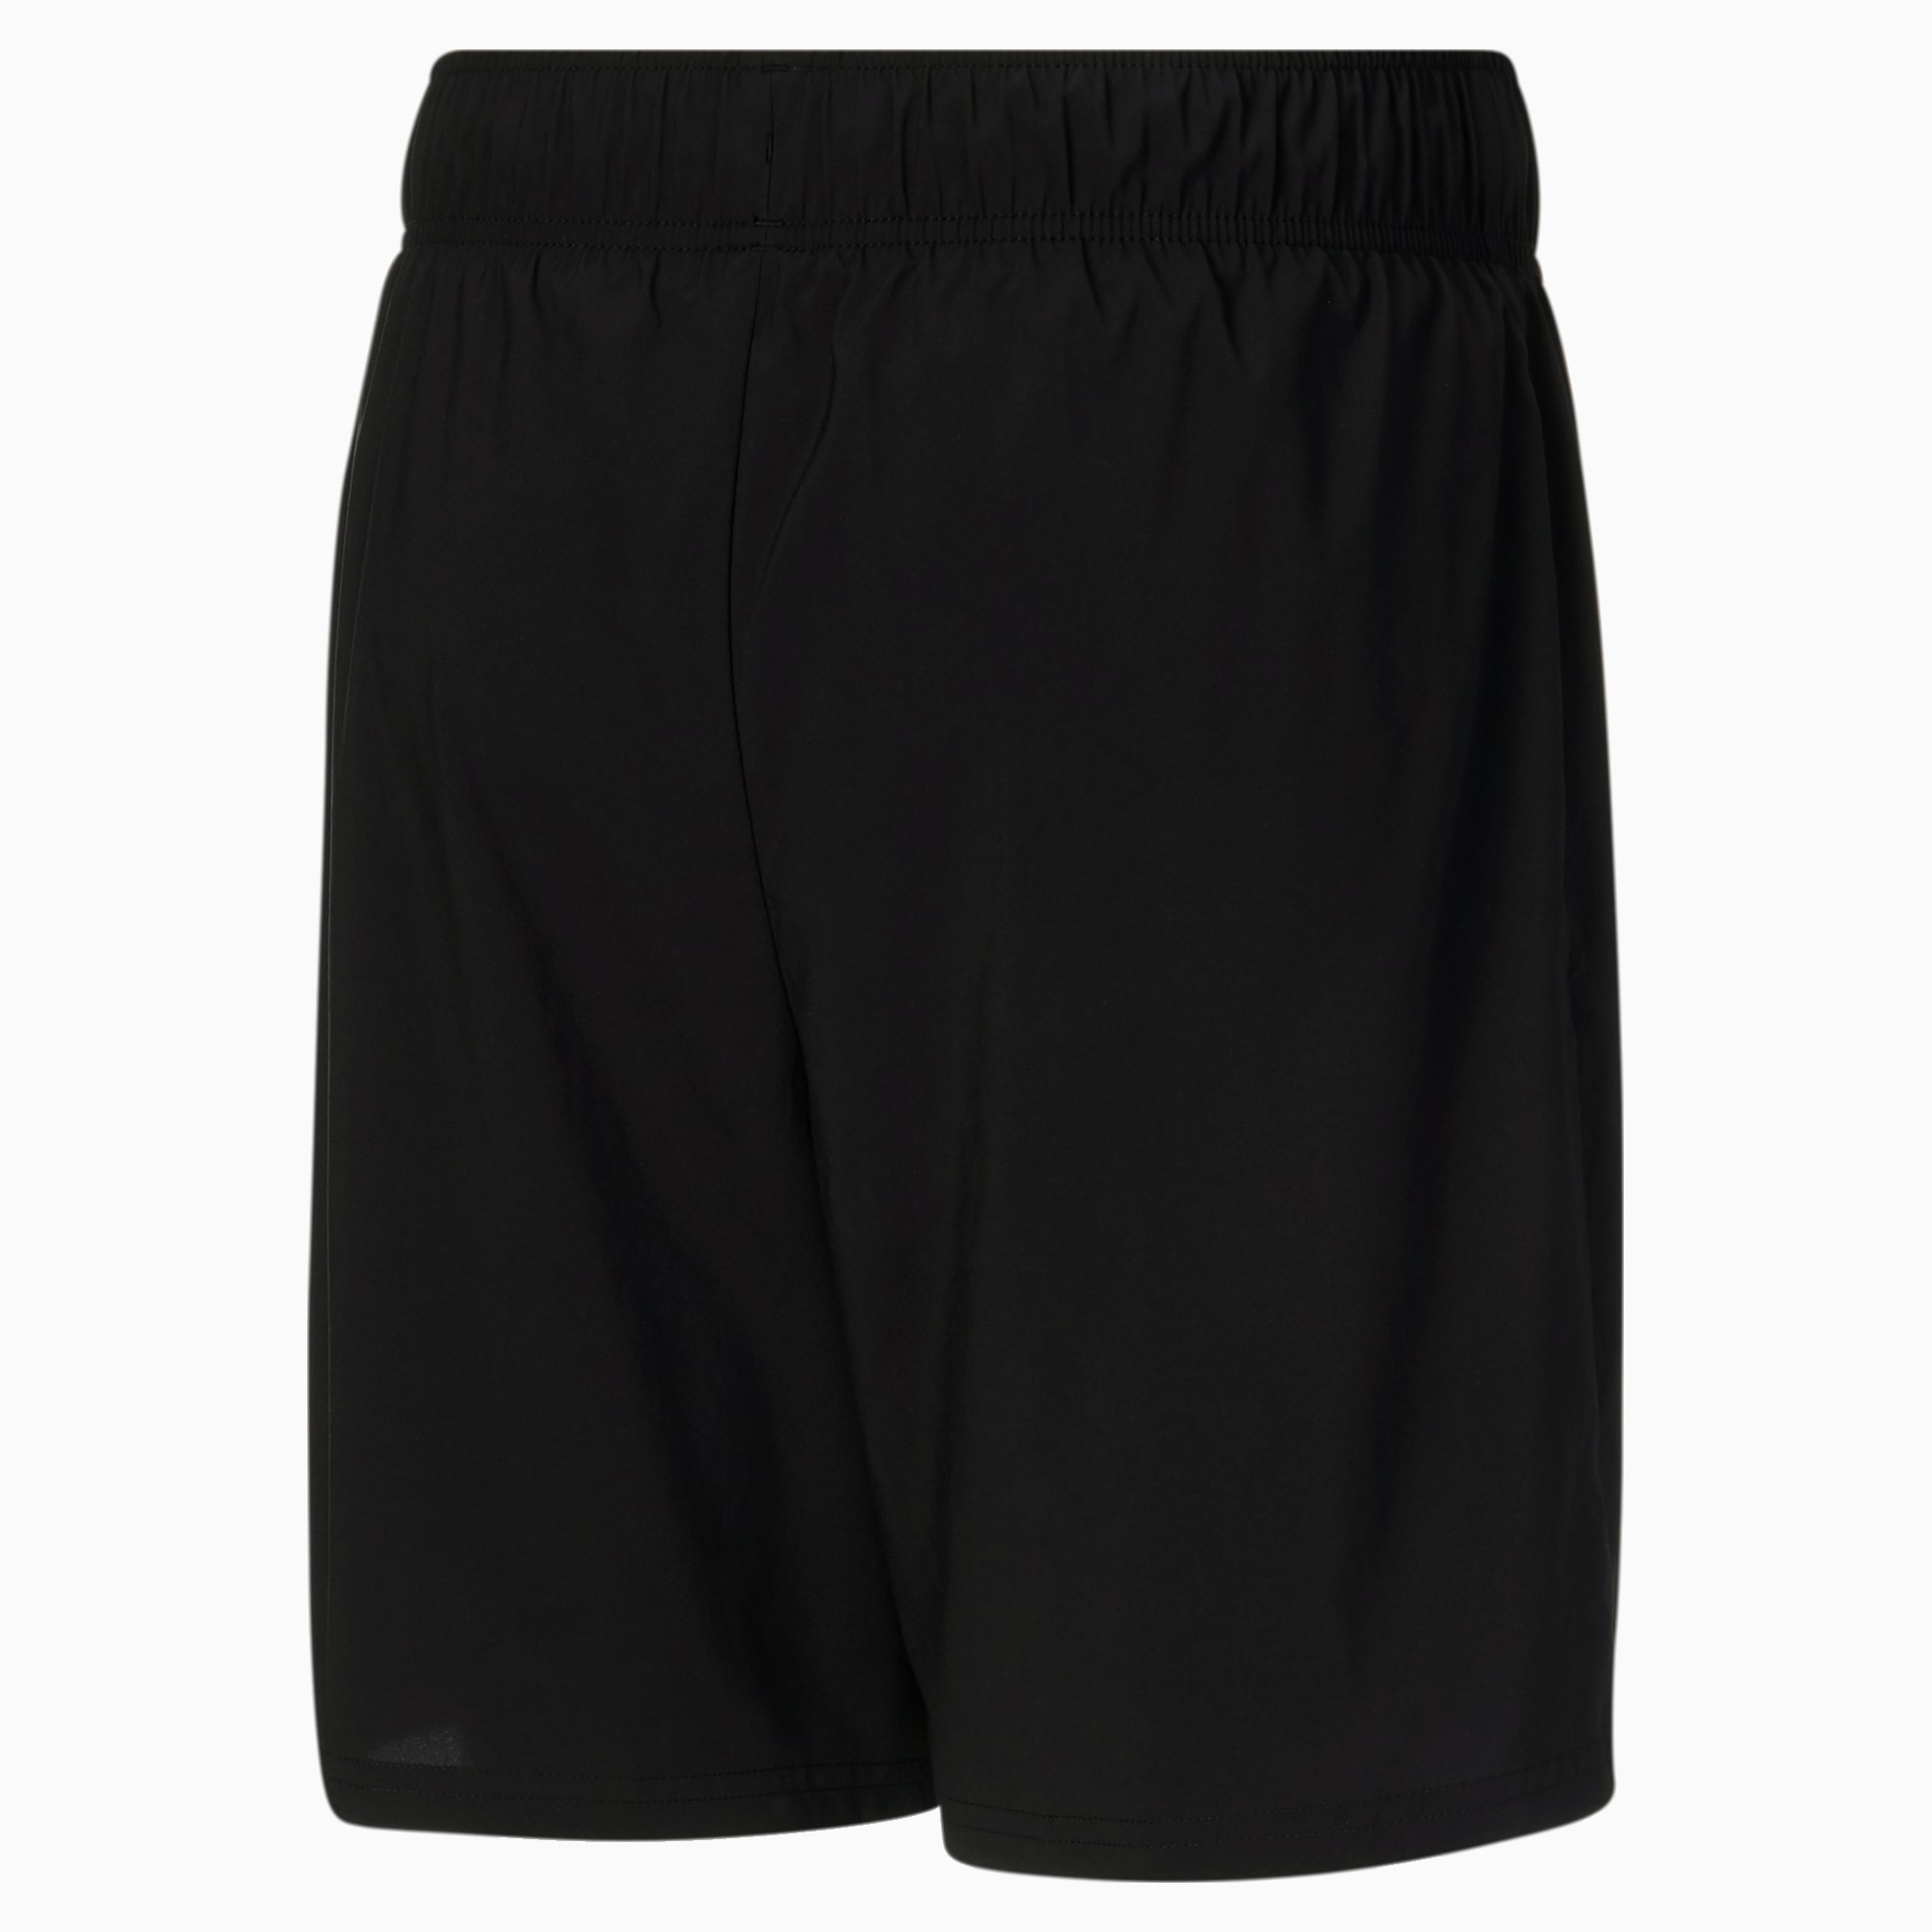 PUMA Favourite 2-in-1 Men's Running Shorts, Black, Size S, Clothing